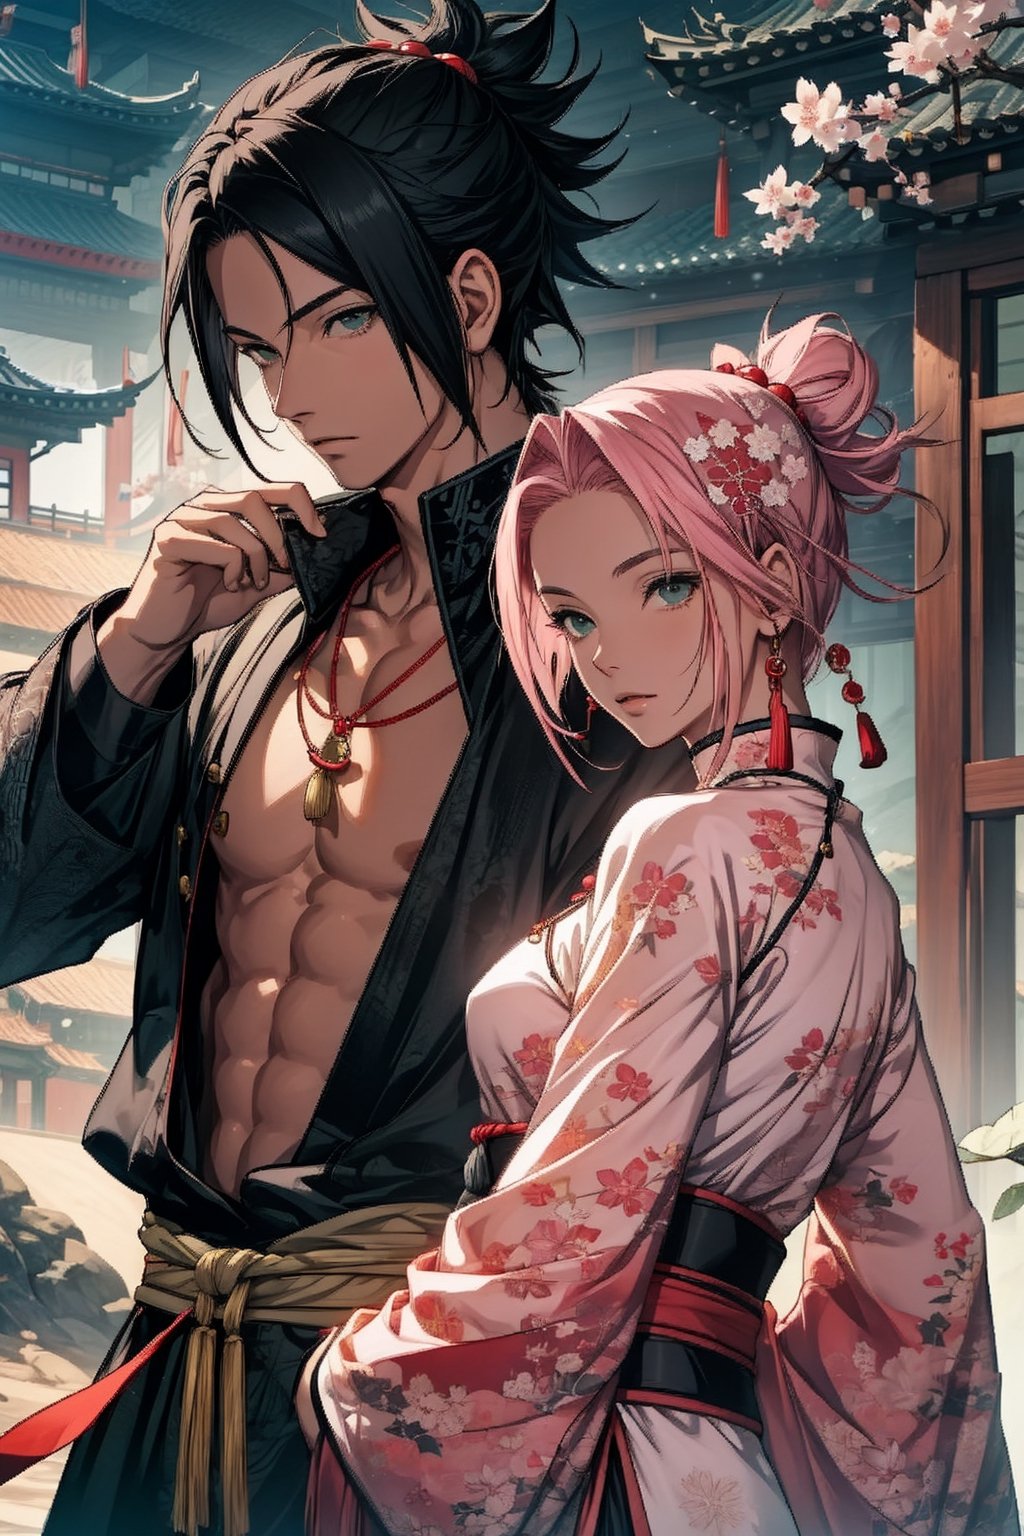 1girl with short pink hair and green eyes and small breast wearing chinese-styled dress named Sakura Haruno, 1boy with black hair and black eyes named Sasuke Uchiha, both having hair ornaments and jewelry, necklace, wearing chinese-styled clothes, looking into camera, couple, royalty, harunoshipp, Sasukeanime,Sasuke Uchiha, ancient china,ancient_beautiful